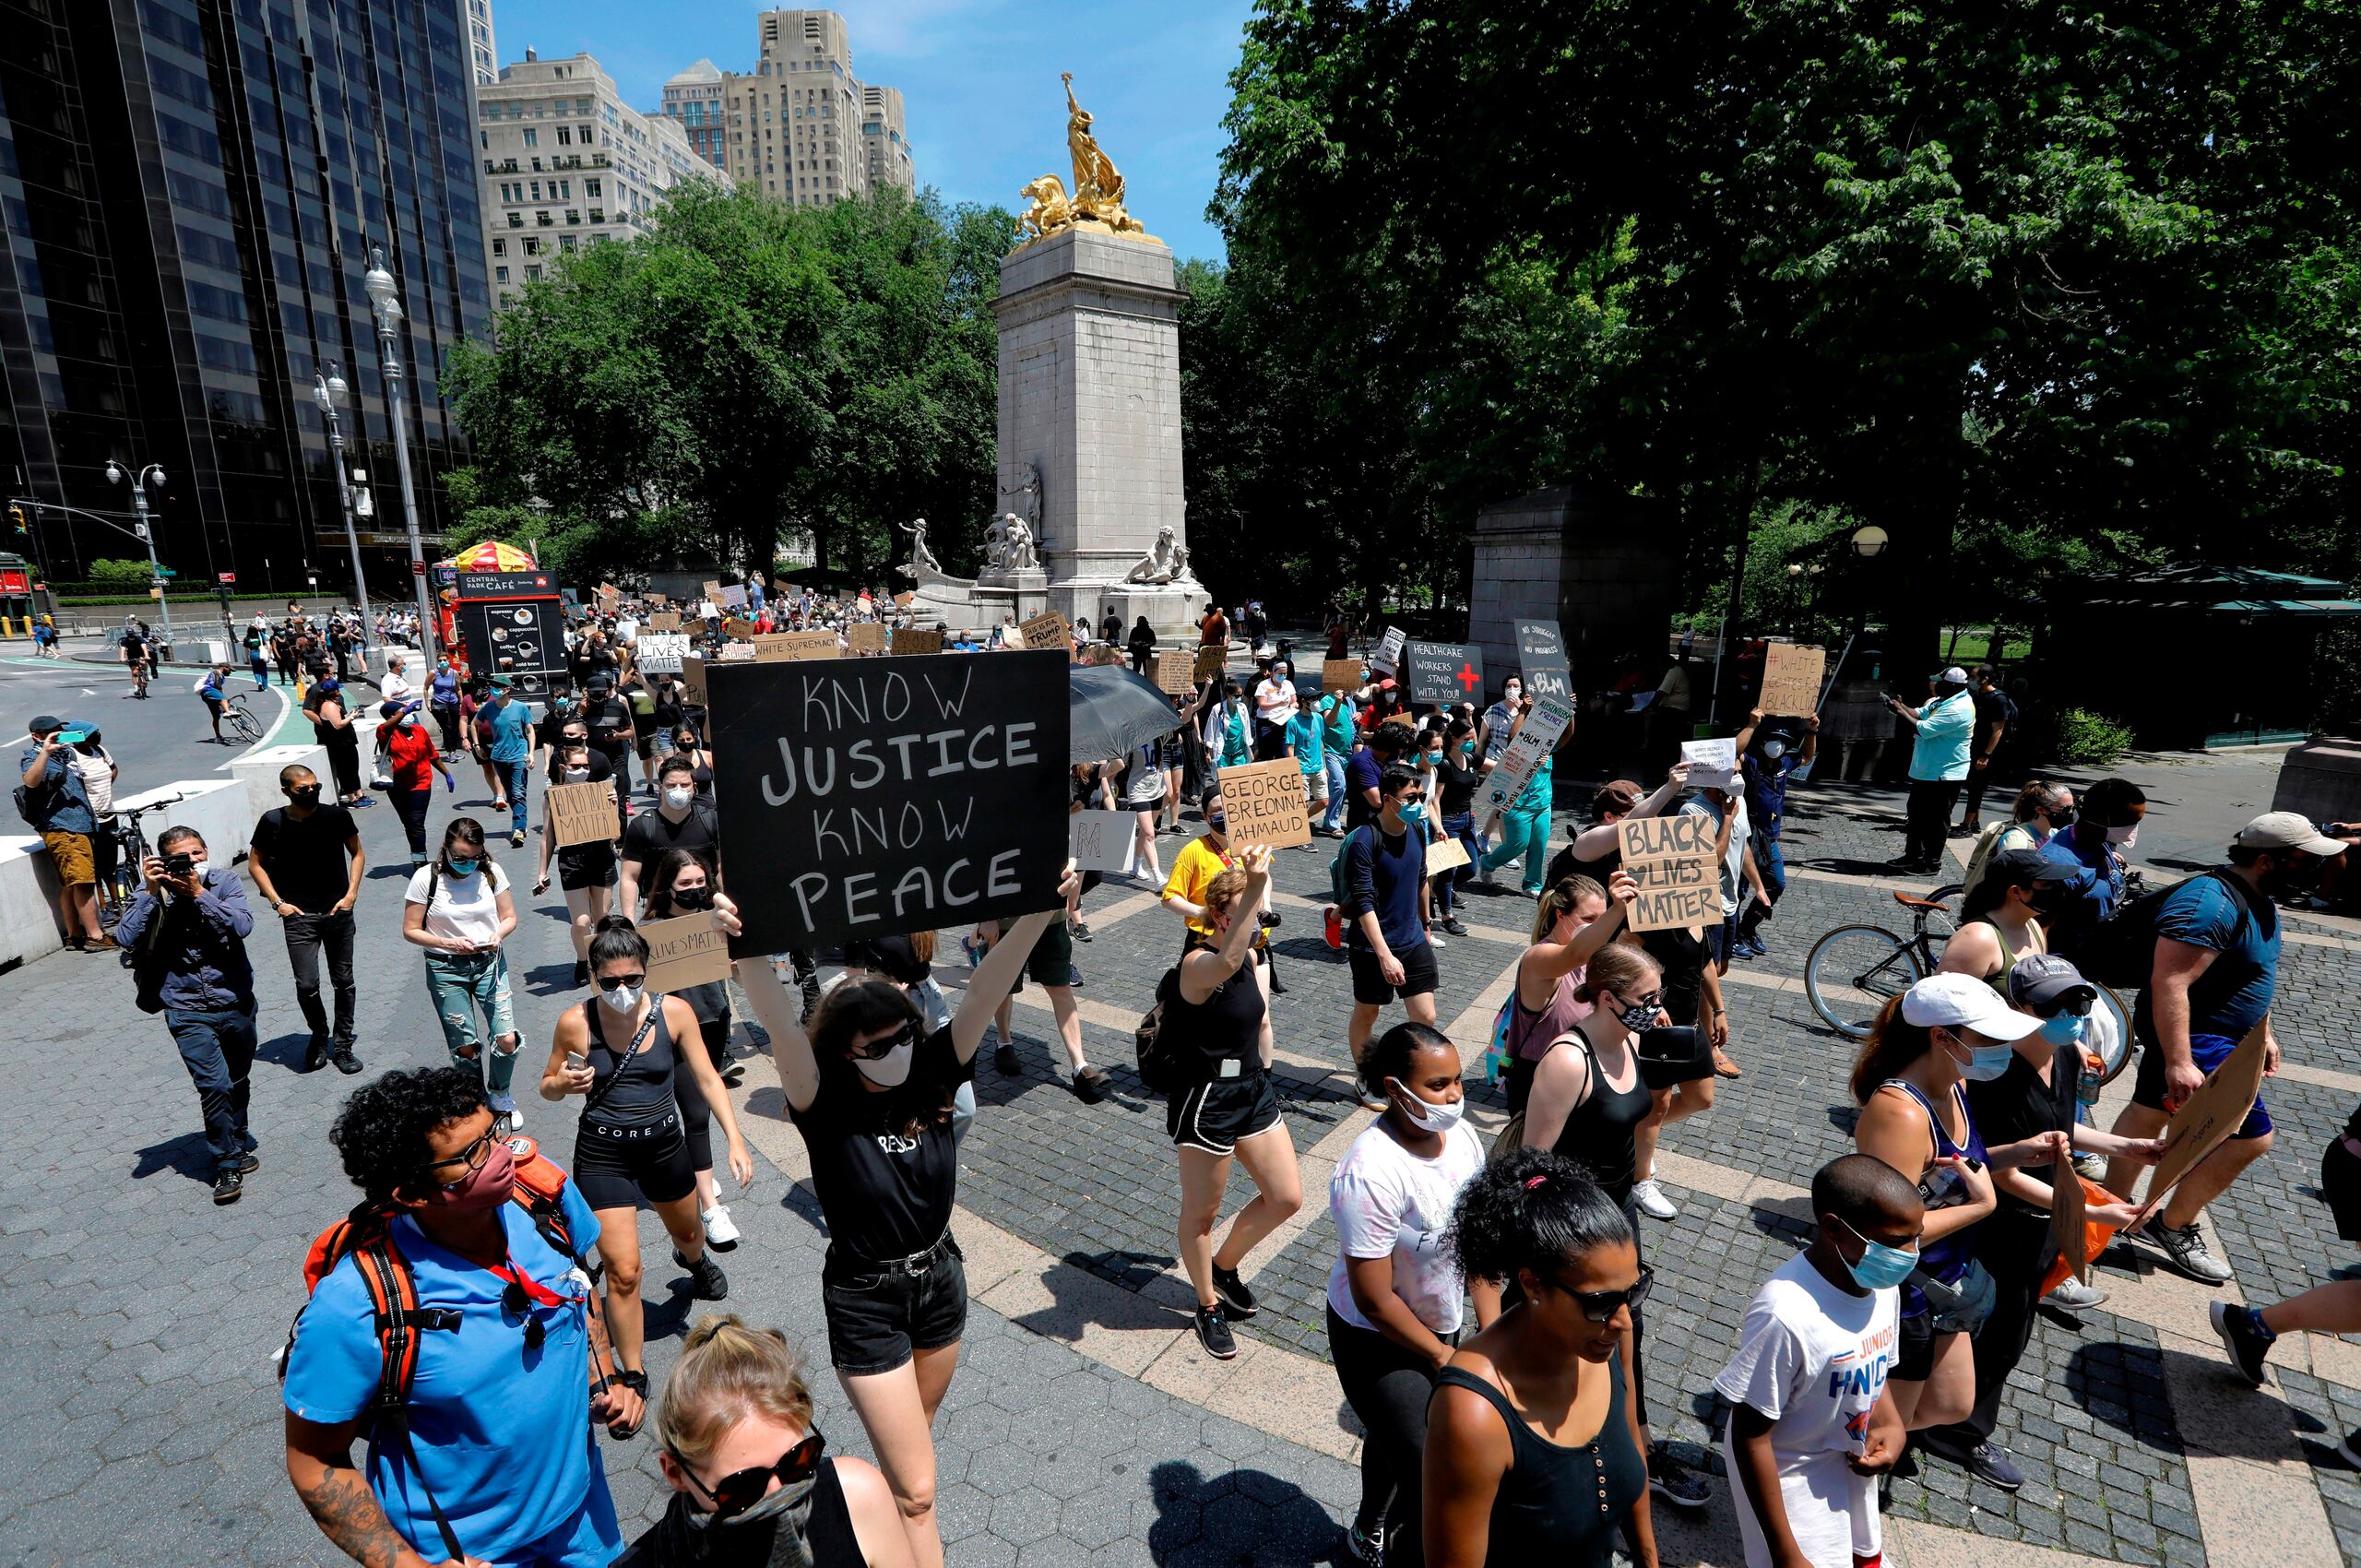 People march in protest at Columbus Circle, 12 days on after George Floyd's death in police custody, in New York, USA, 06 June 2020. EFE/EPA/Peter Foley
